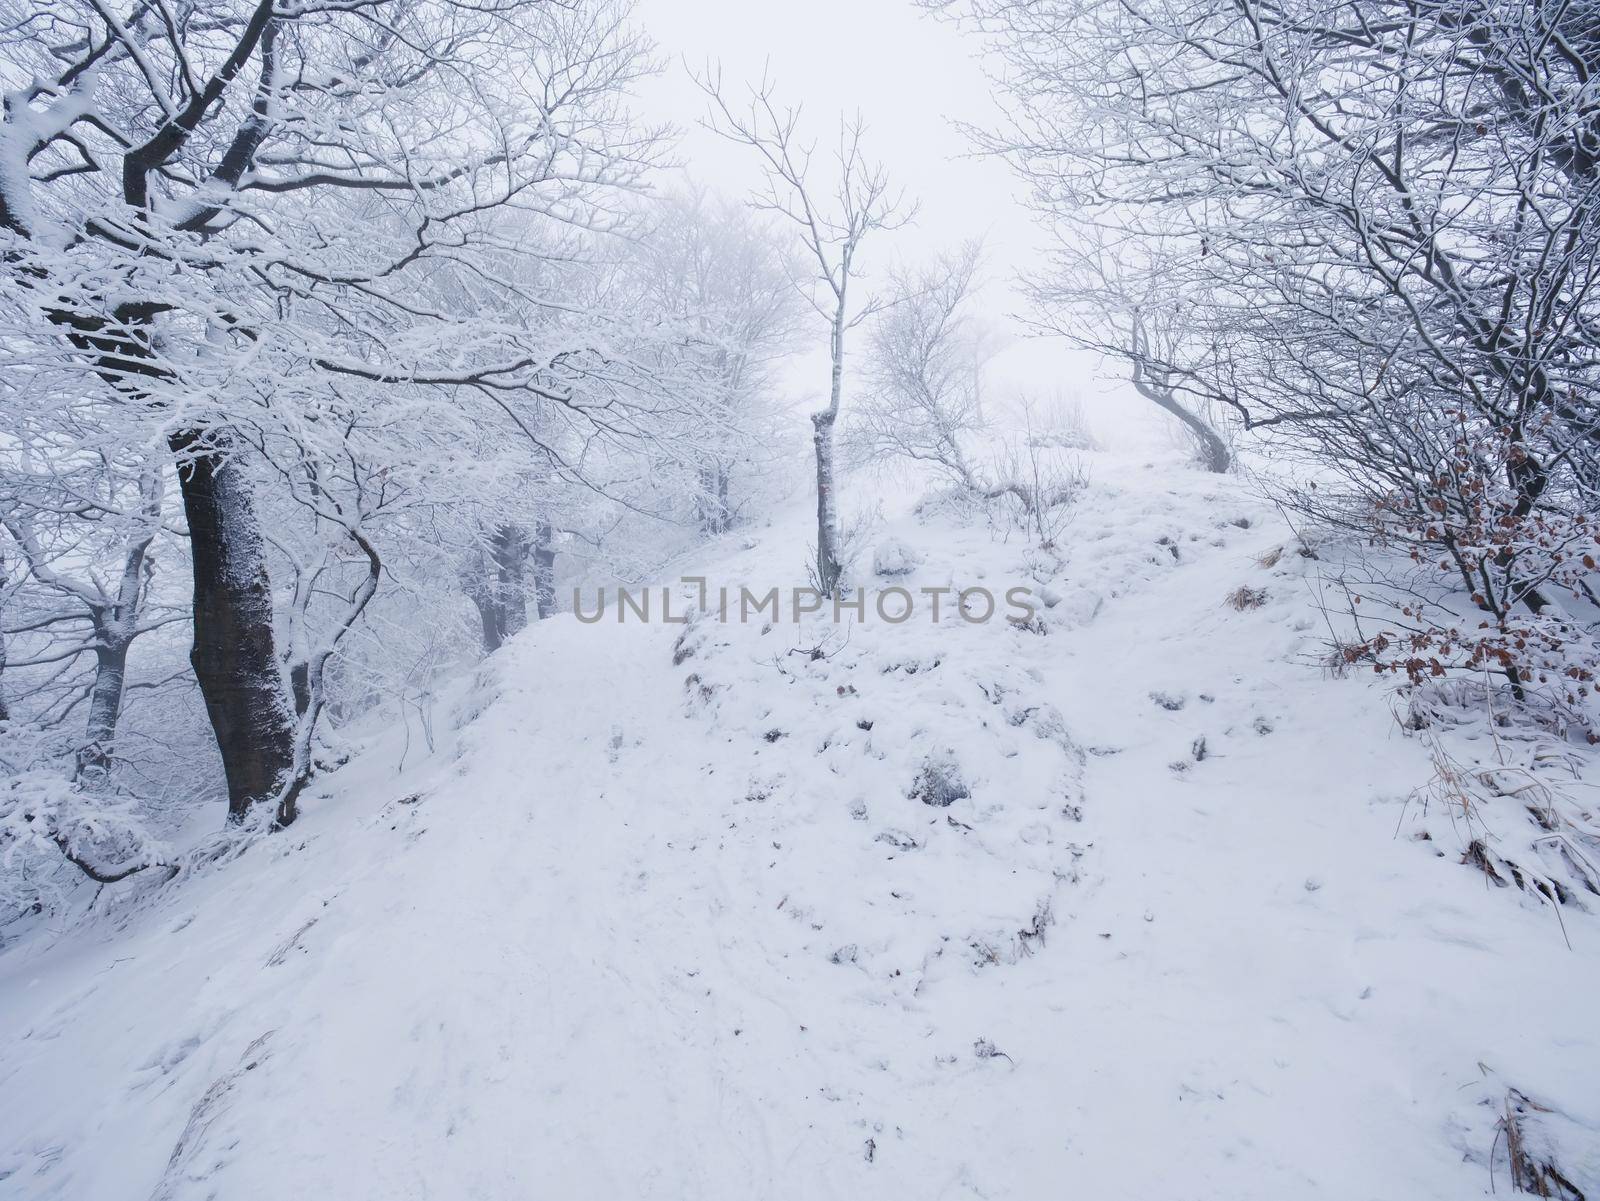 Diminishing snowy path through a forest. Winter dark and misty forest on the hillside, terrible snowing